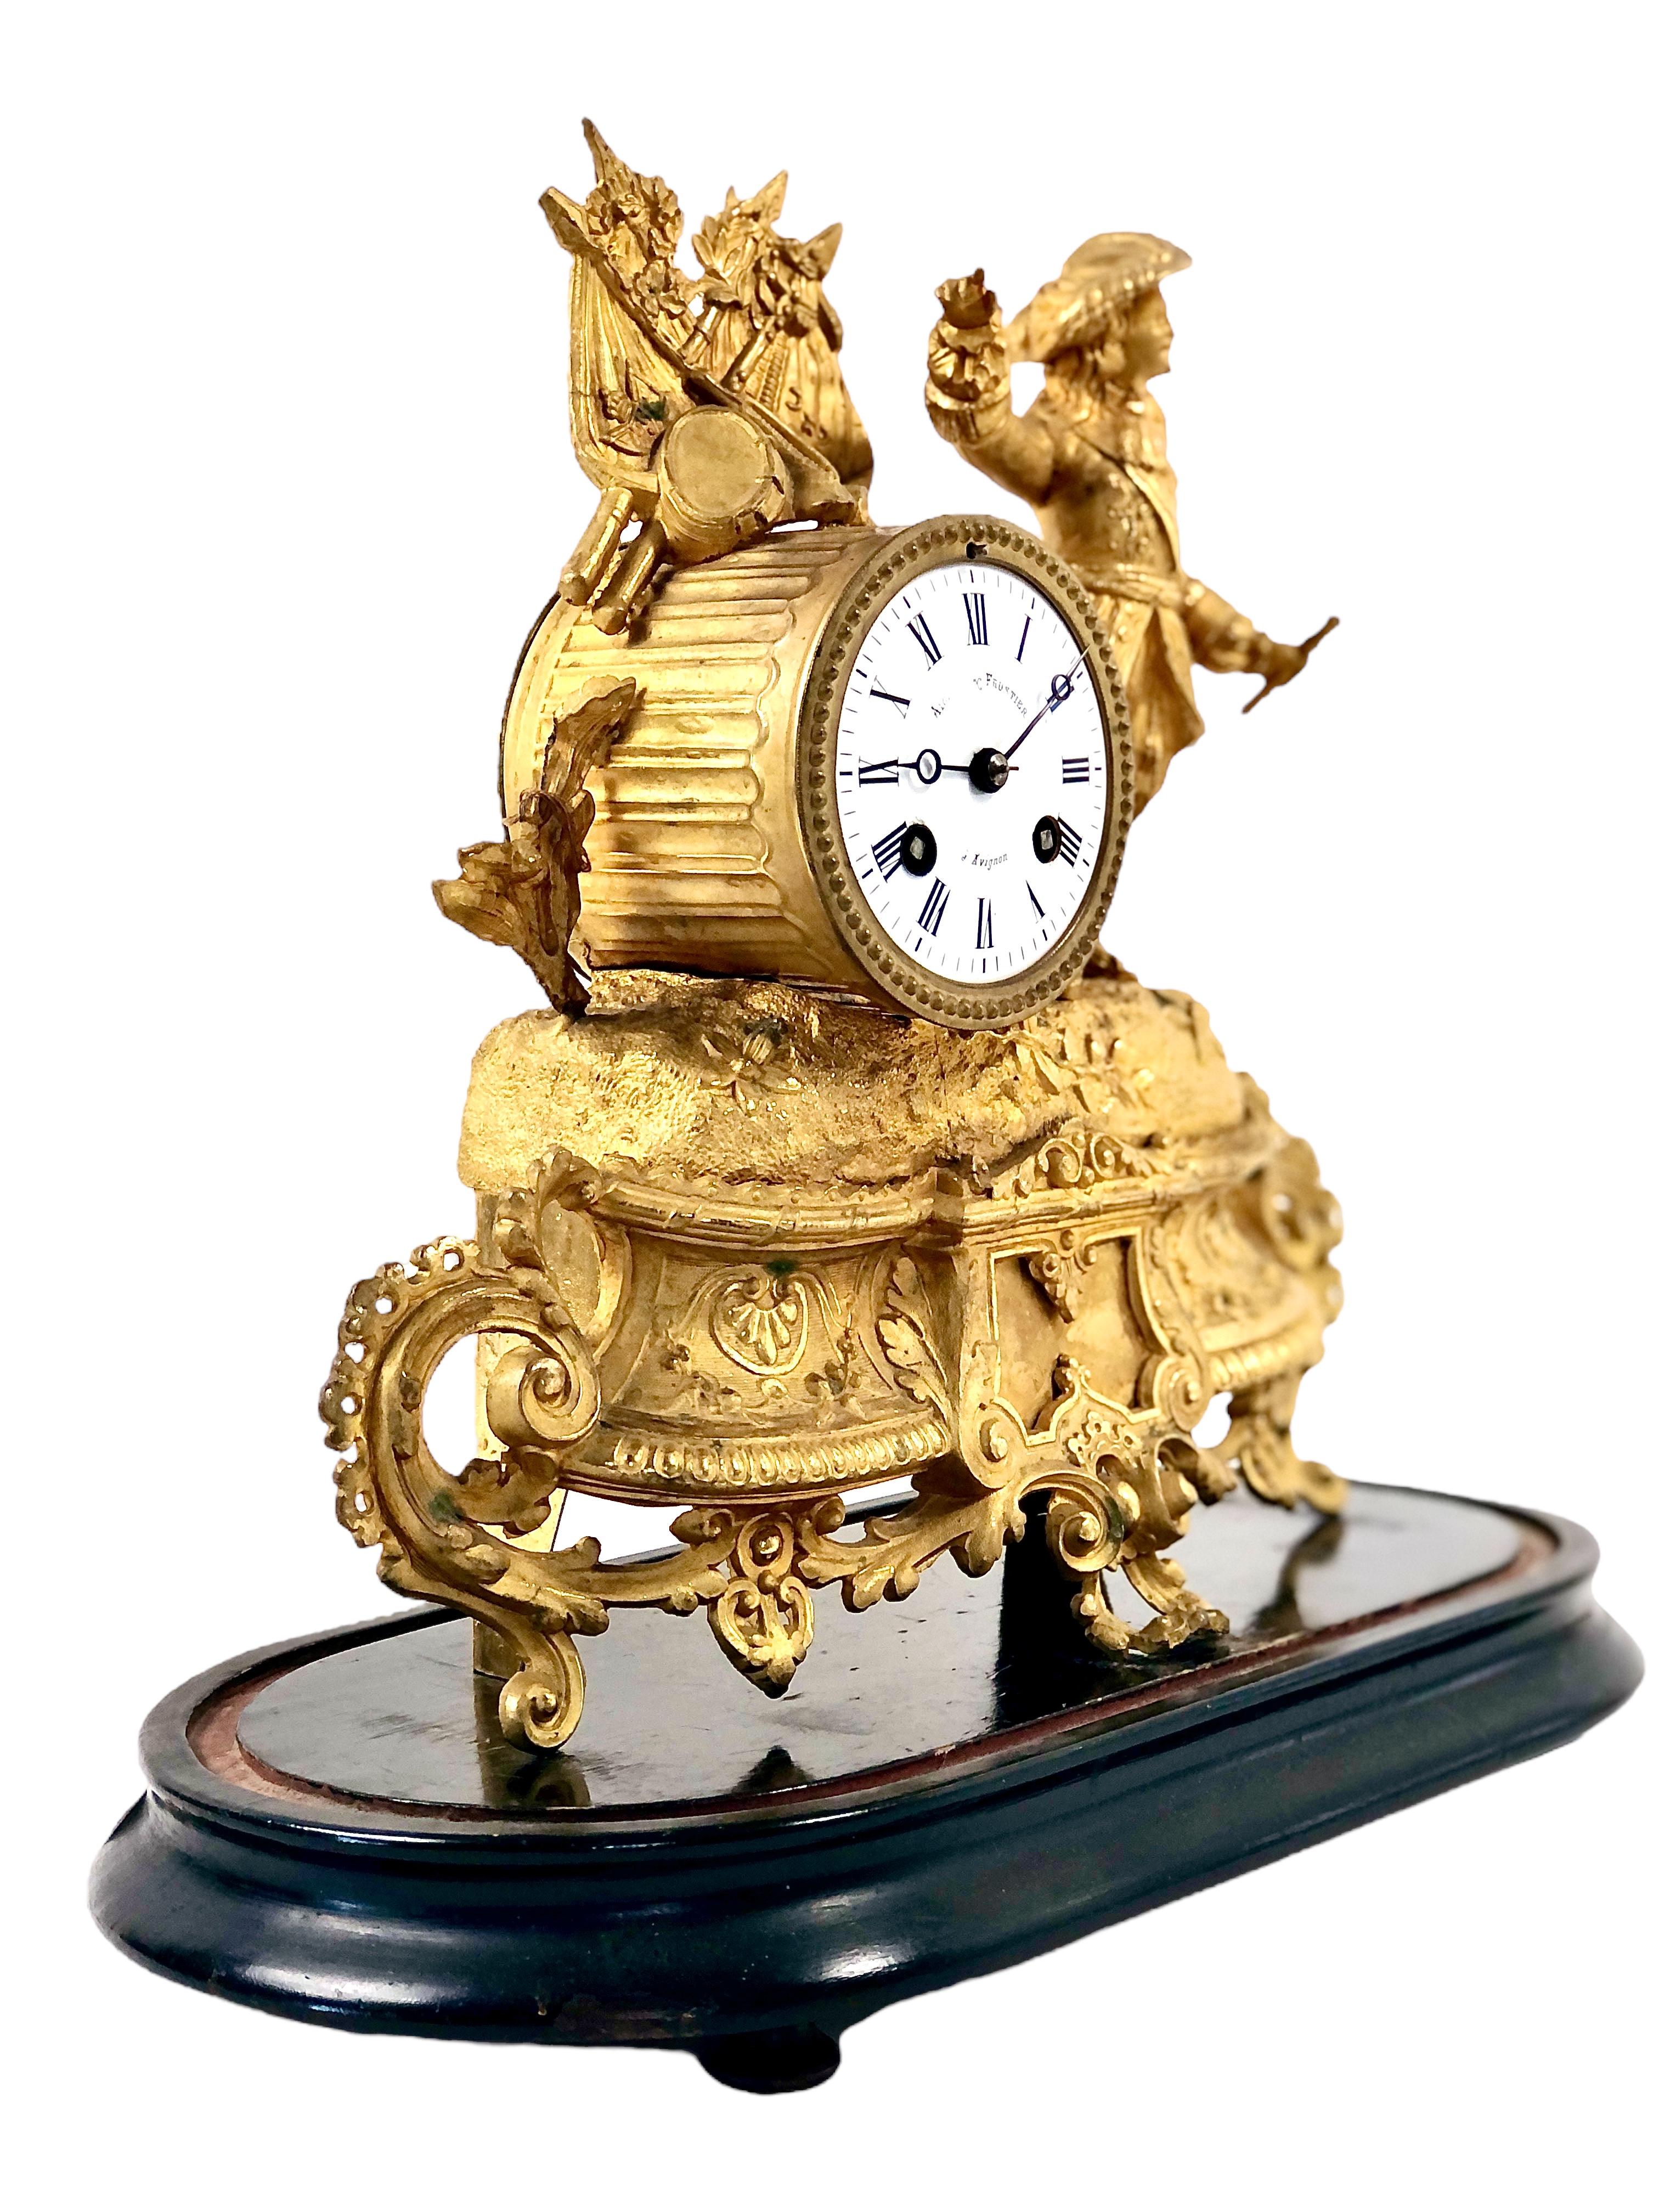 An intricate and beautifully crafted 19th century French gilt mantel clock under a glass dome on a wooden base. Dating from the Napoleon III period, the figurine depicts the illustrious and victorious career of Henri de La Tour d’Auvergne, Viscount